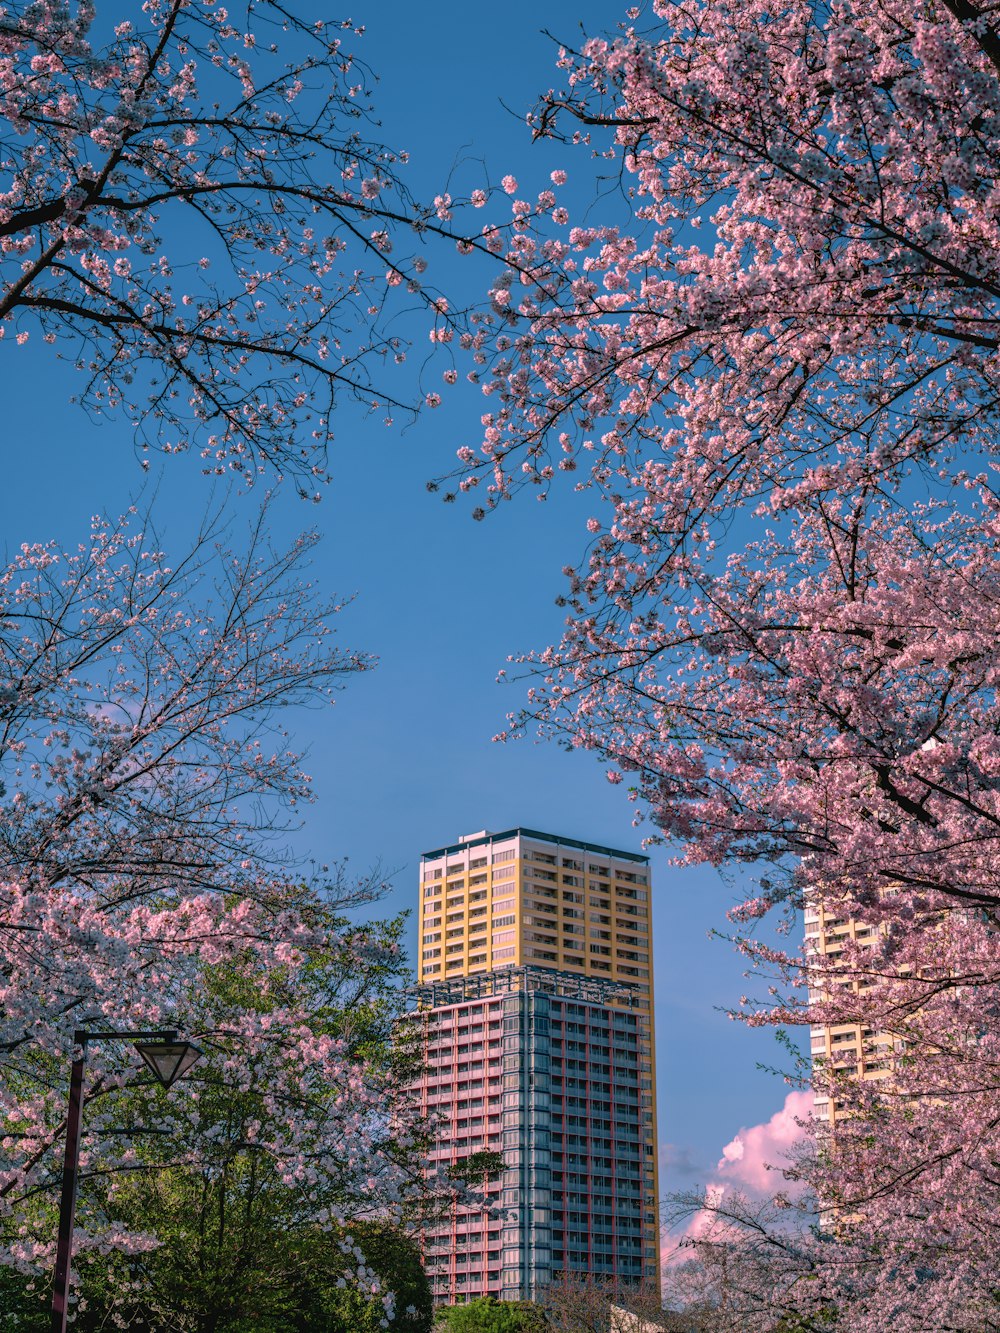 a tall building surrounded by cherry blossom trees